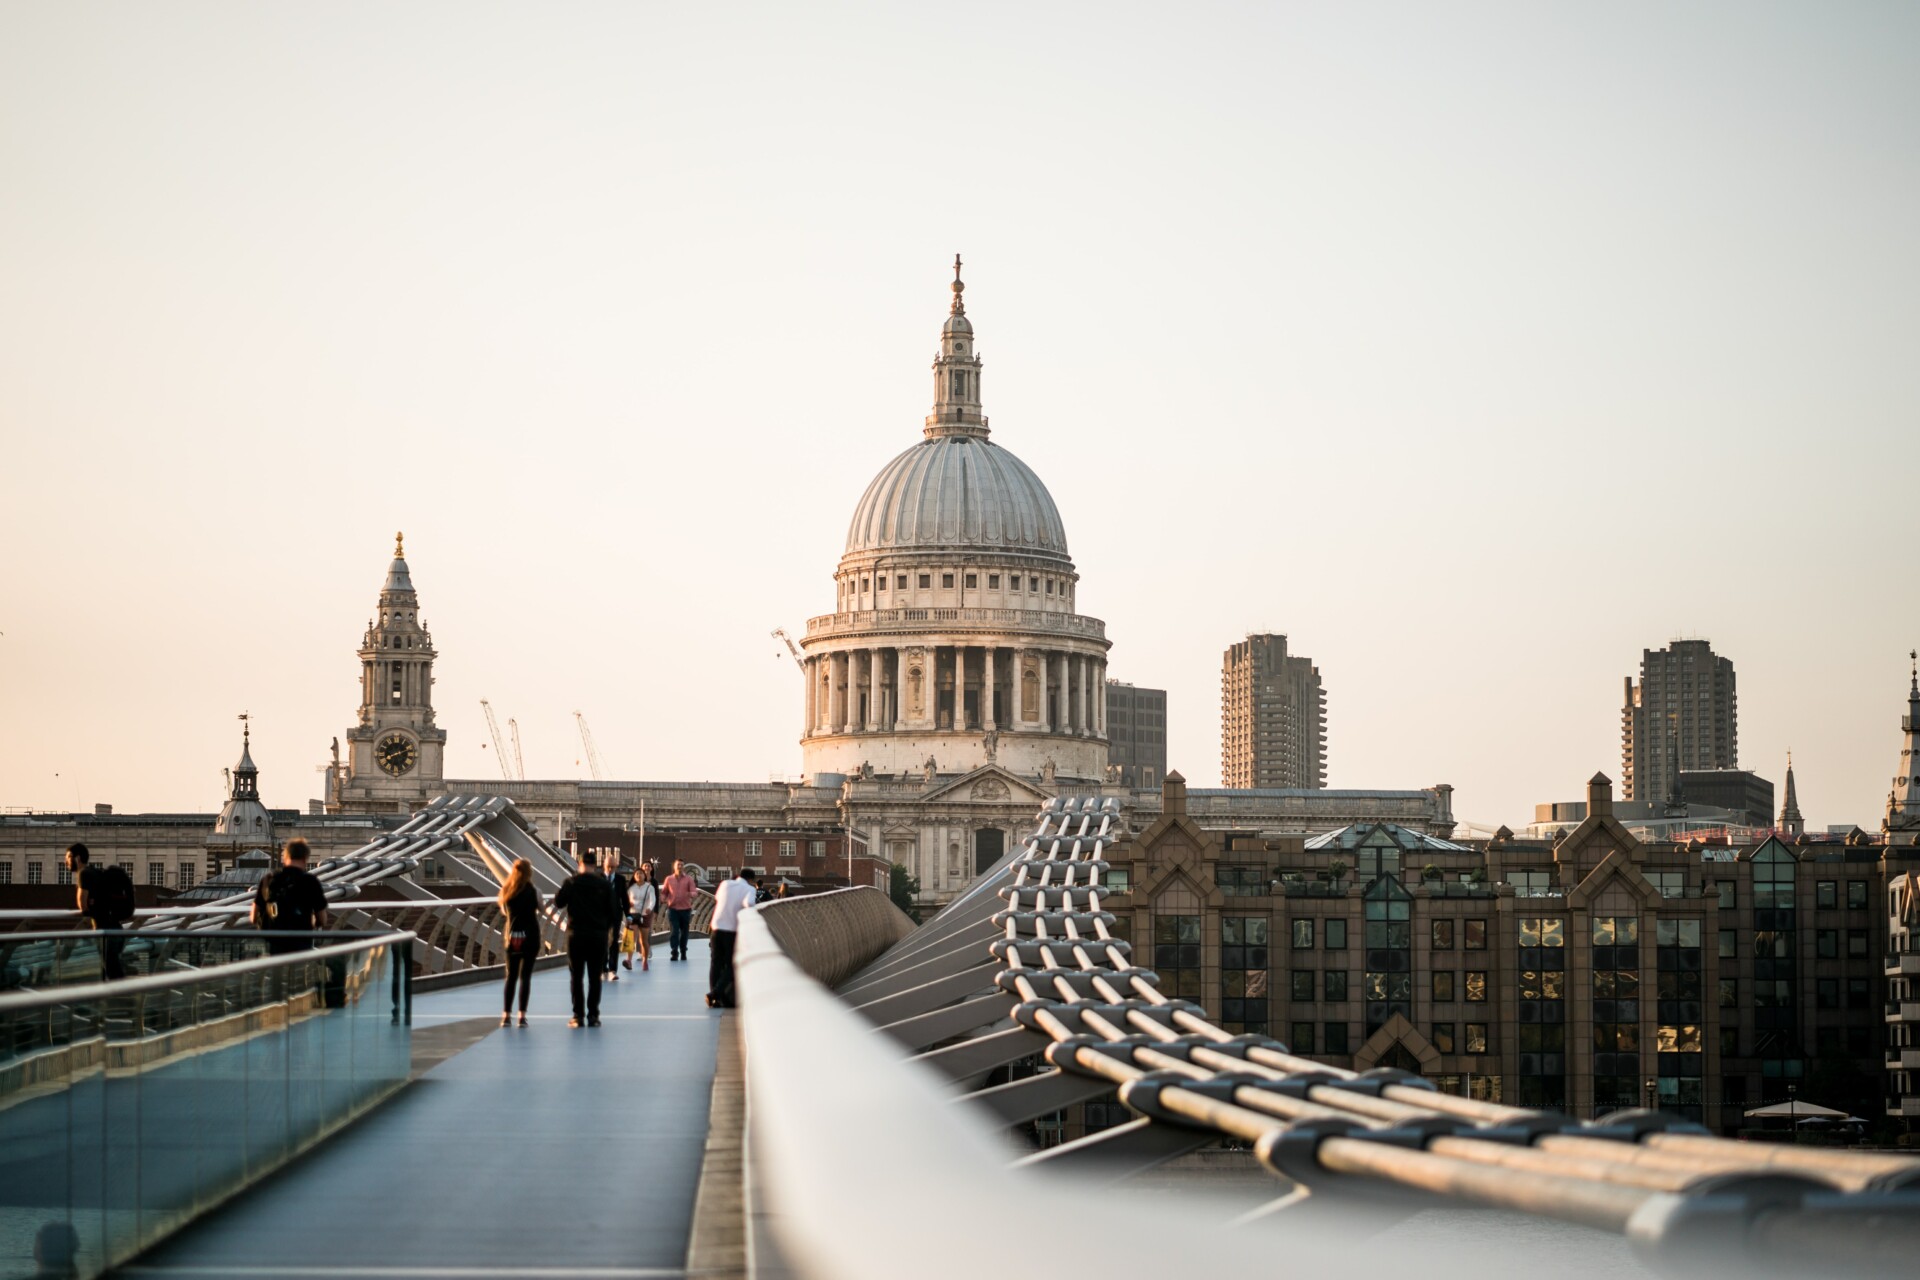 St. Paul's Cathedral and the Millennium Bridge in London, England